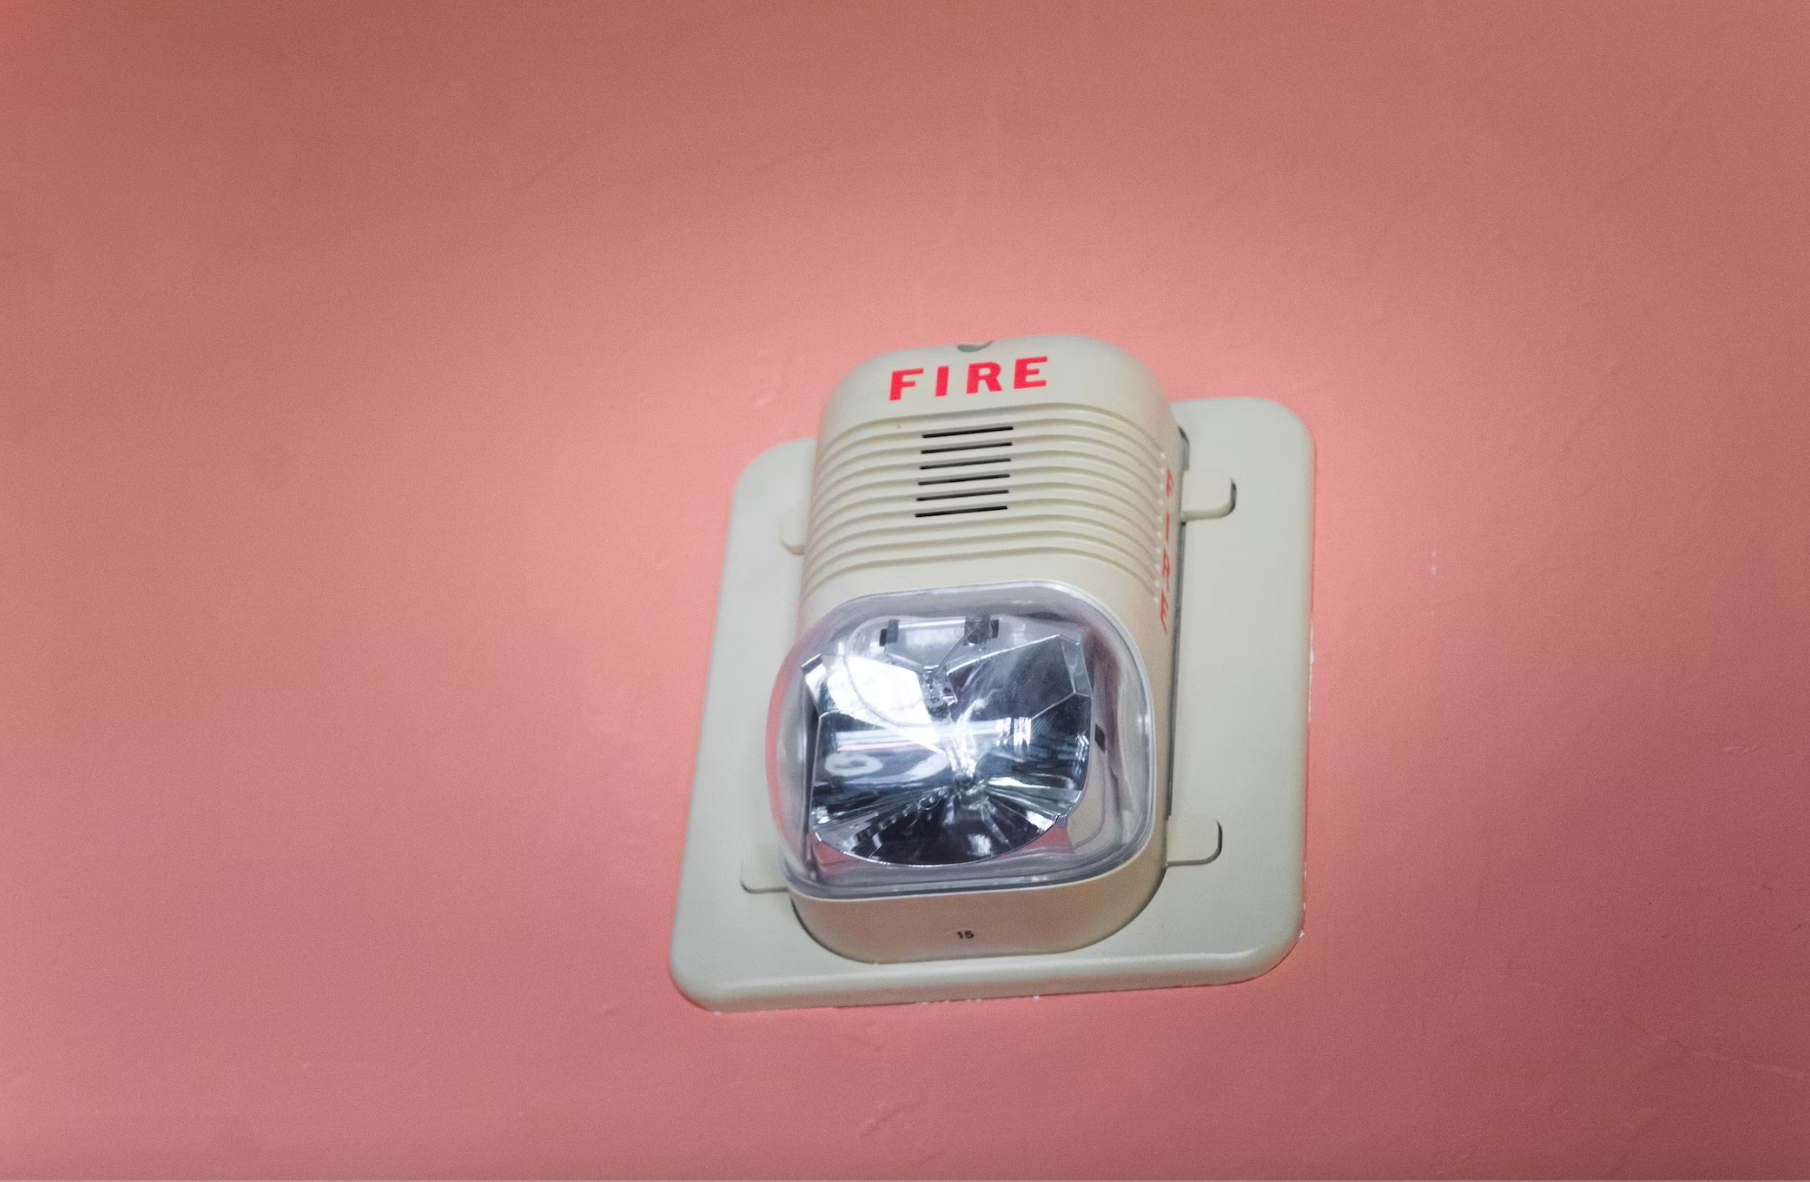 A close up image of a fire alarm